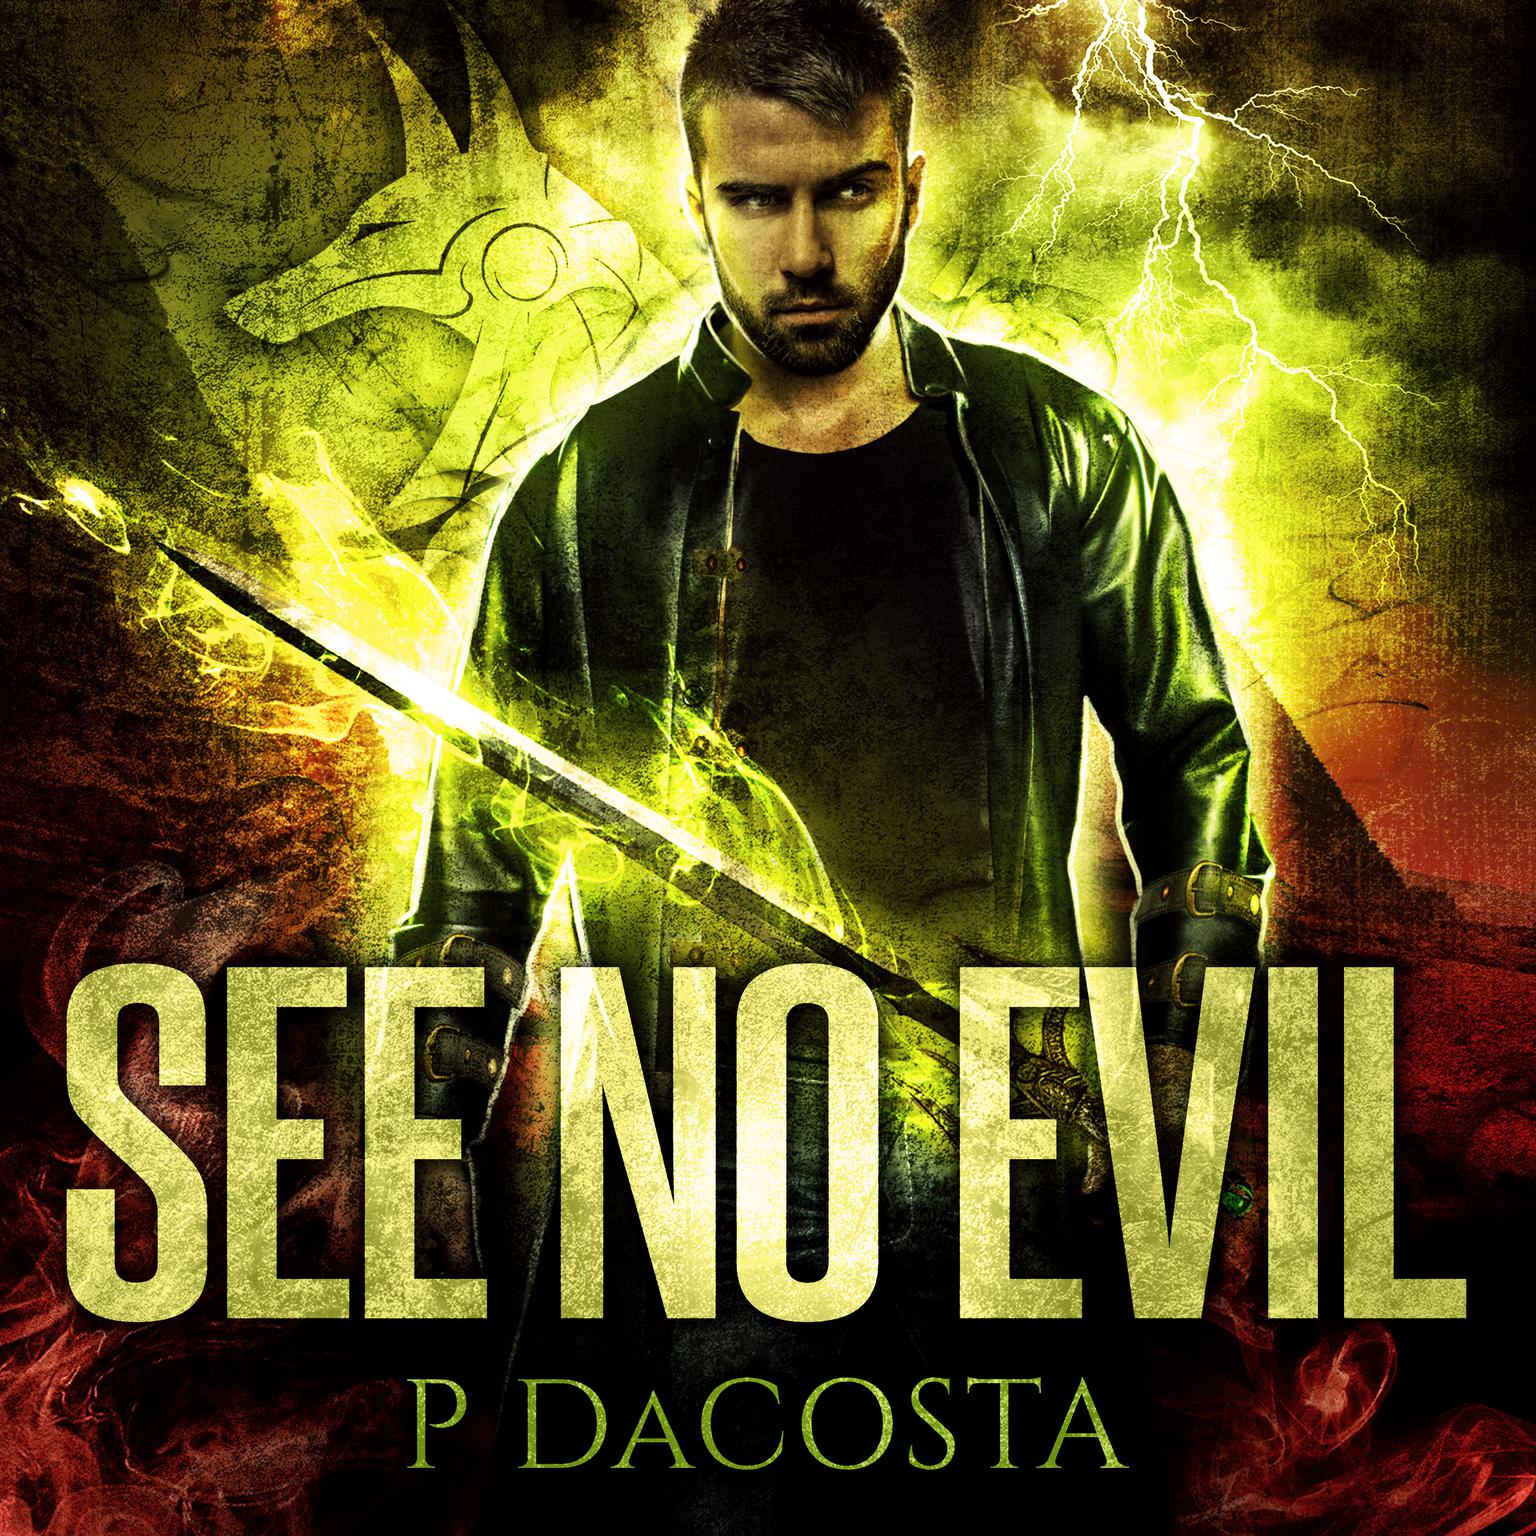 See No Evil Audiobook, by Pippa DaCosta